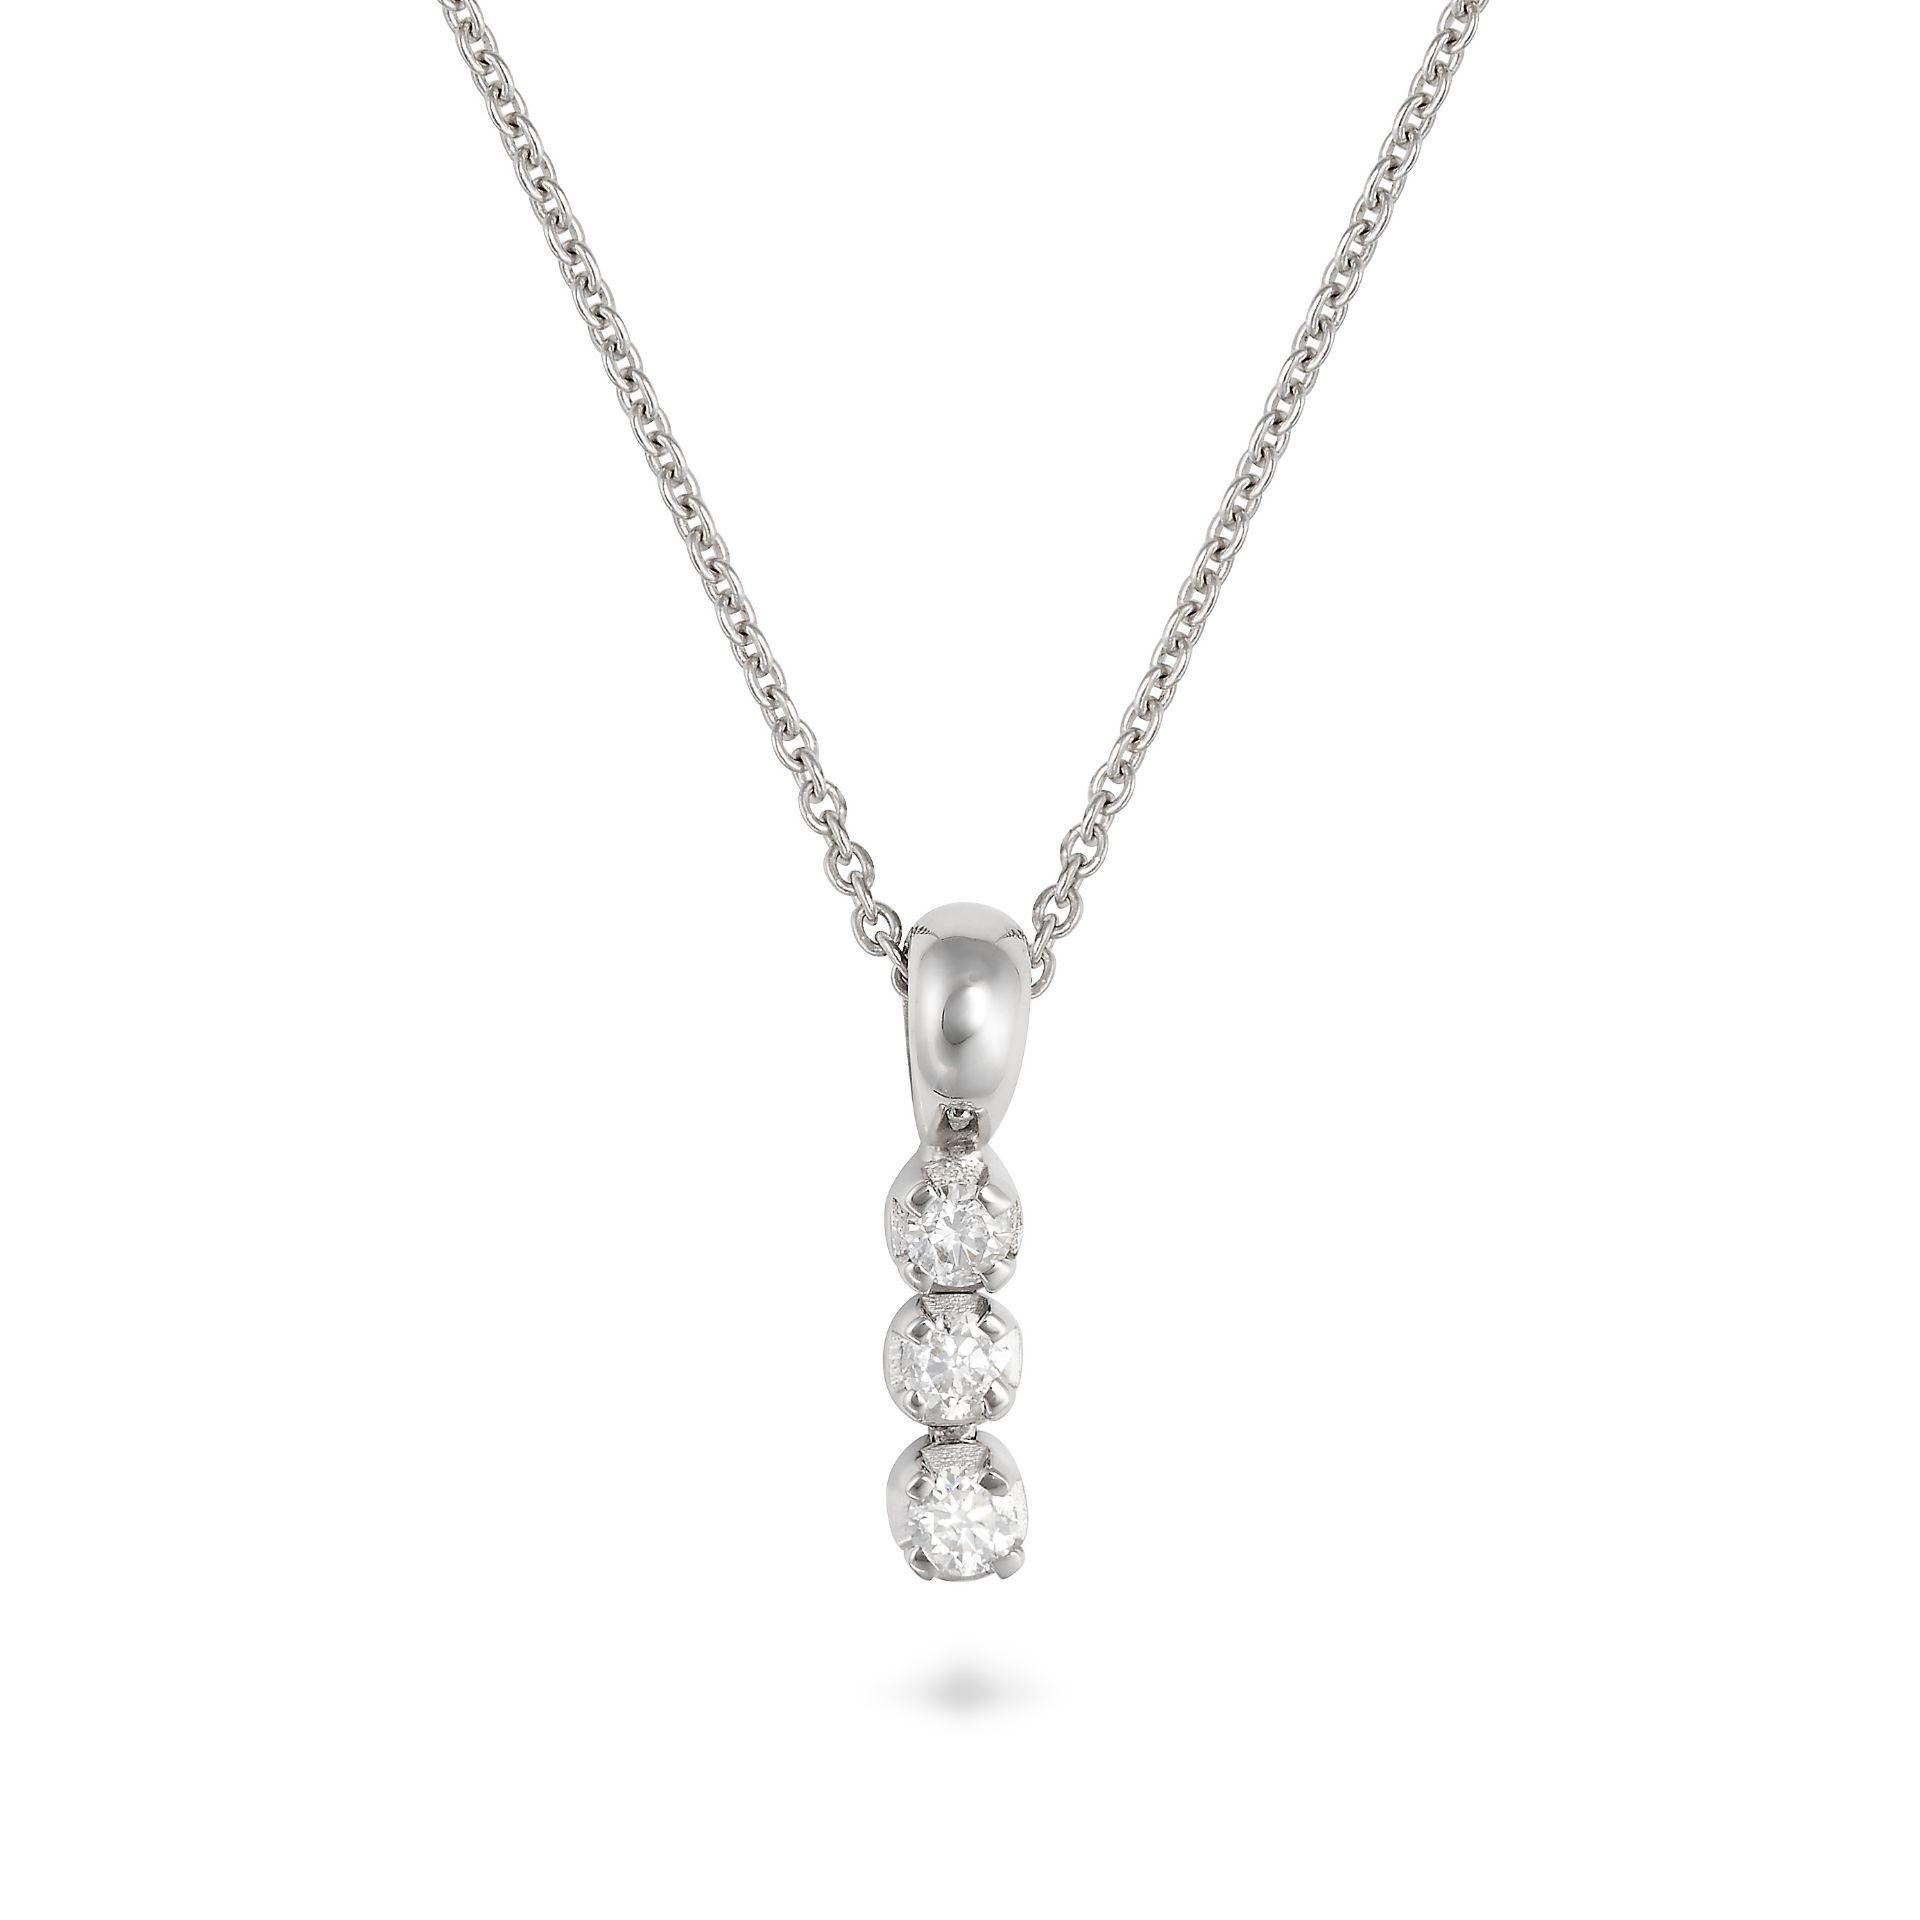 A DIAMOND PENDANT NECKLACE in 18ct white gold, the pendant set with a row of round brilliant cut ...